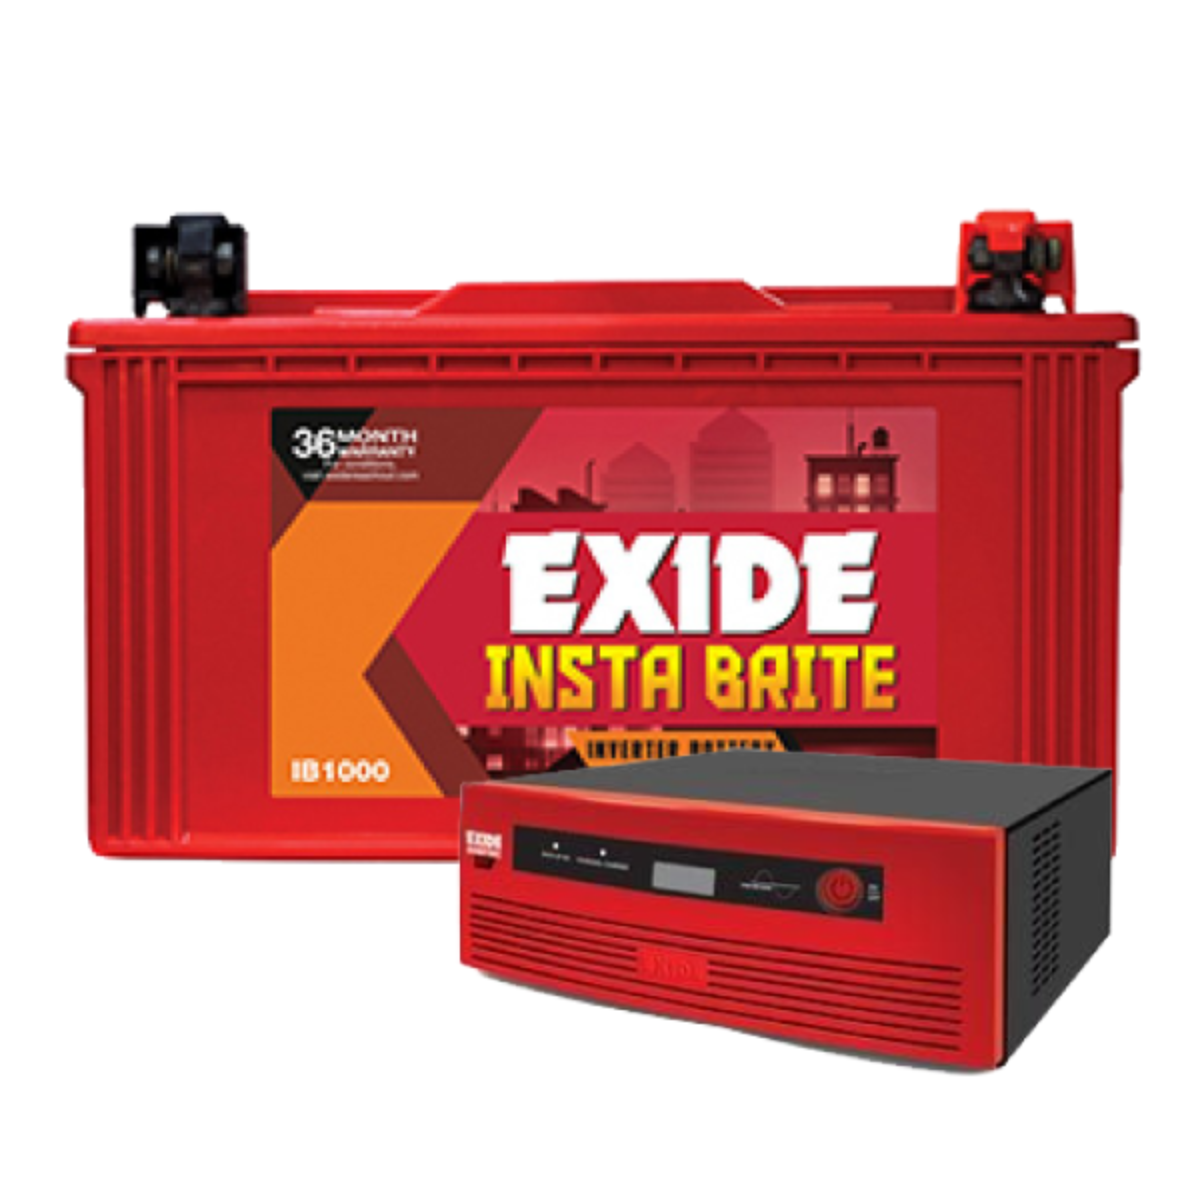 https://omelectronics.in/wp-content/uploads/2021/07/Exide-GQP-850VA-Sinewave-Home-UPS-And-IB-1000-100Ah-Flat-Plate-Battery-1200x1200.png